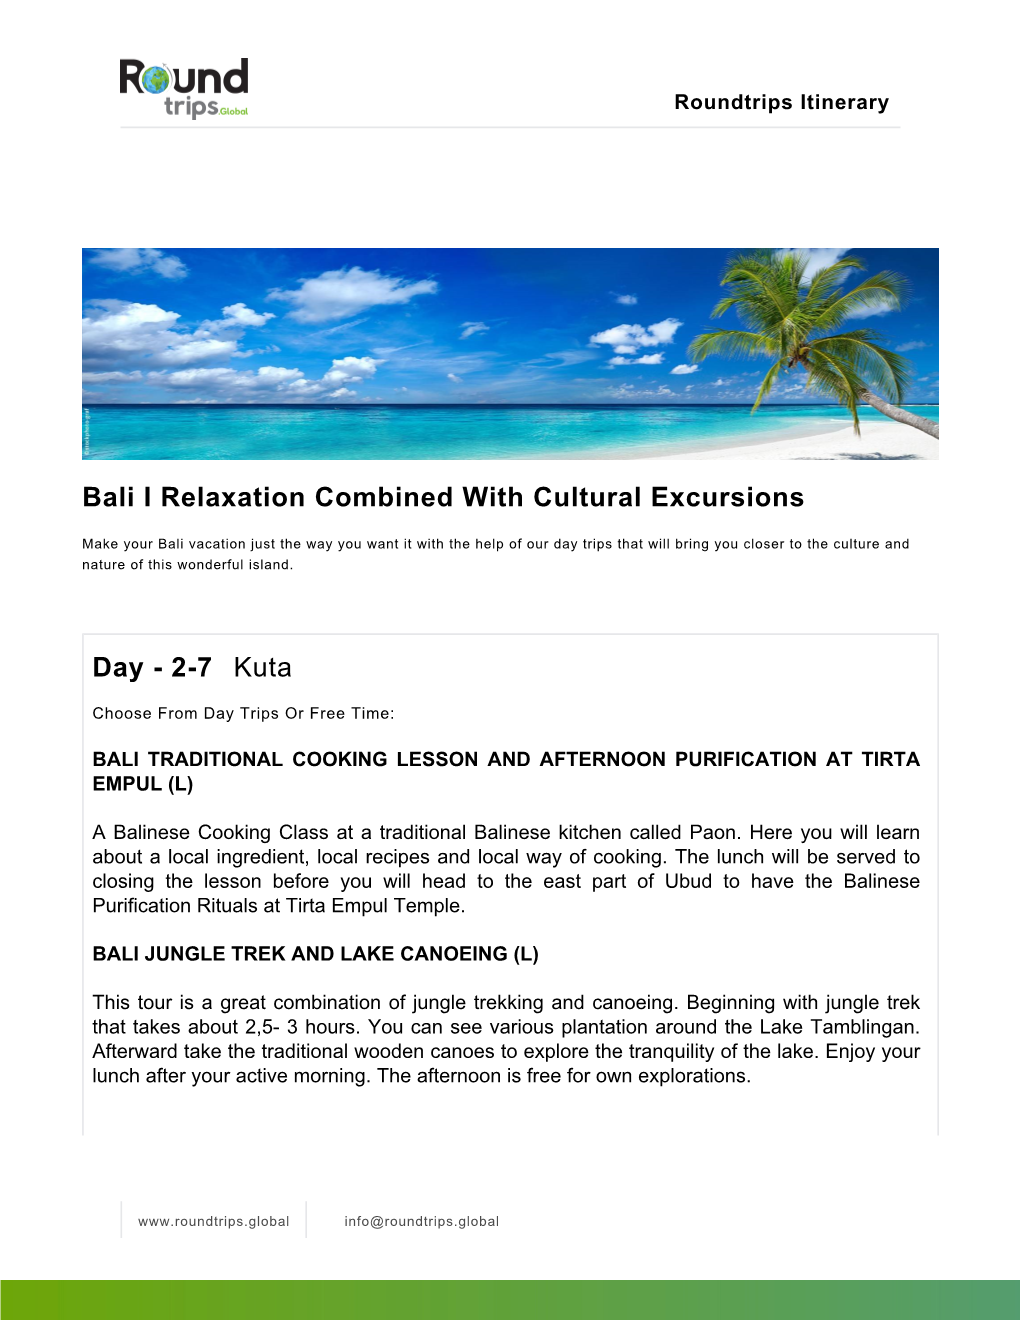 Bali I Relaxation Combined with Cultural Excursions